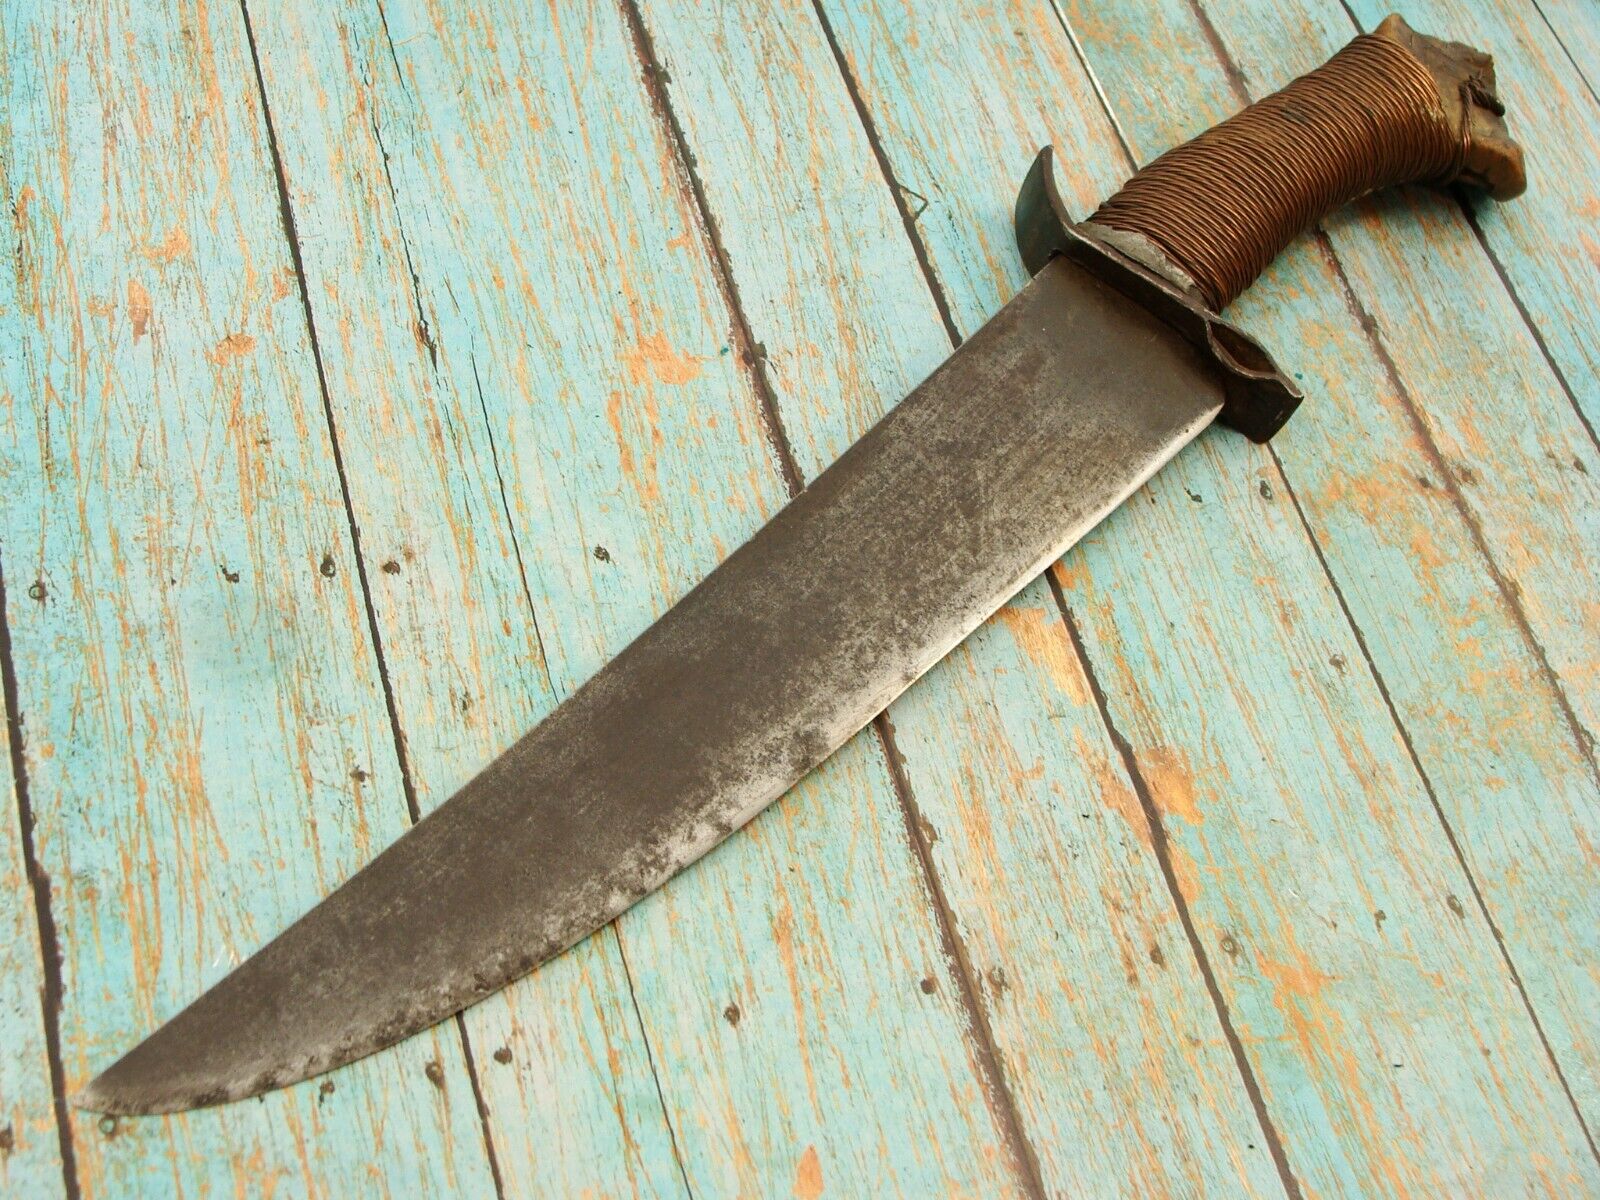 BIG PRIMATIVE EARLY AMERICAN CIVIL WAR HANDMADE HUNTING BOWIE TRADE KNIFE KNIVES